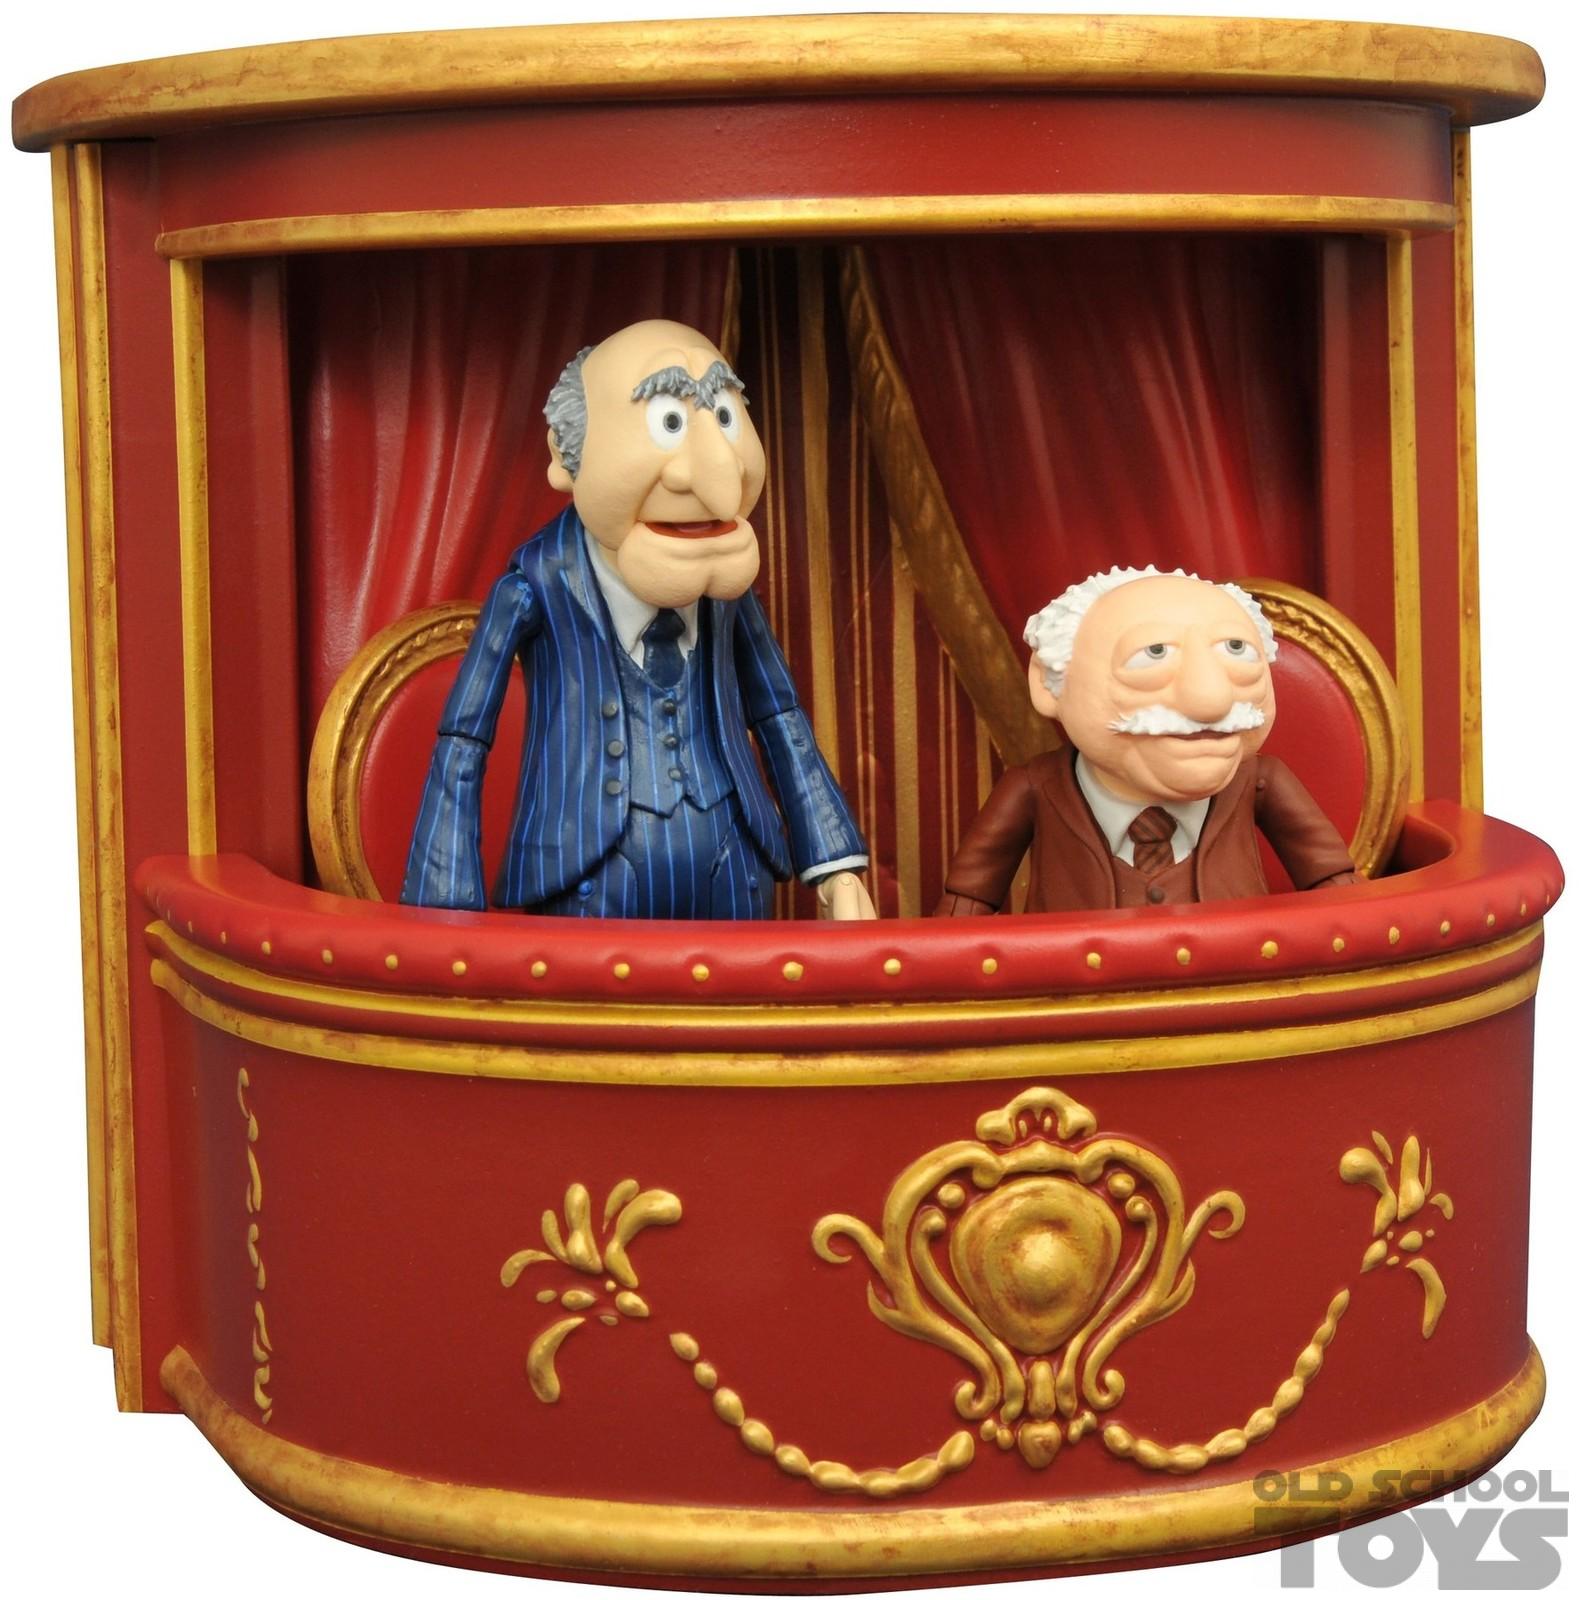 Rusland logo boot Statler & Waldorf the Muppets Diamond Select in doos | Old School Toys